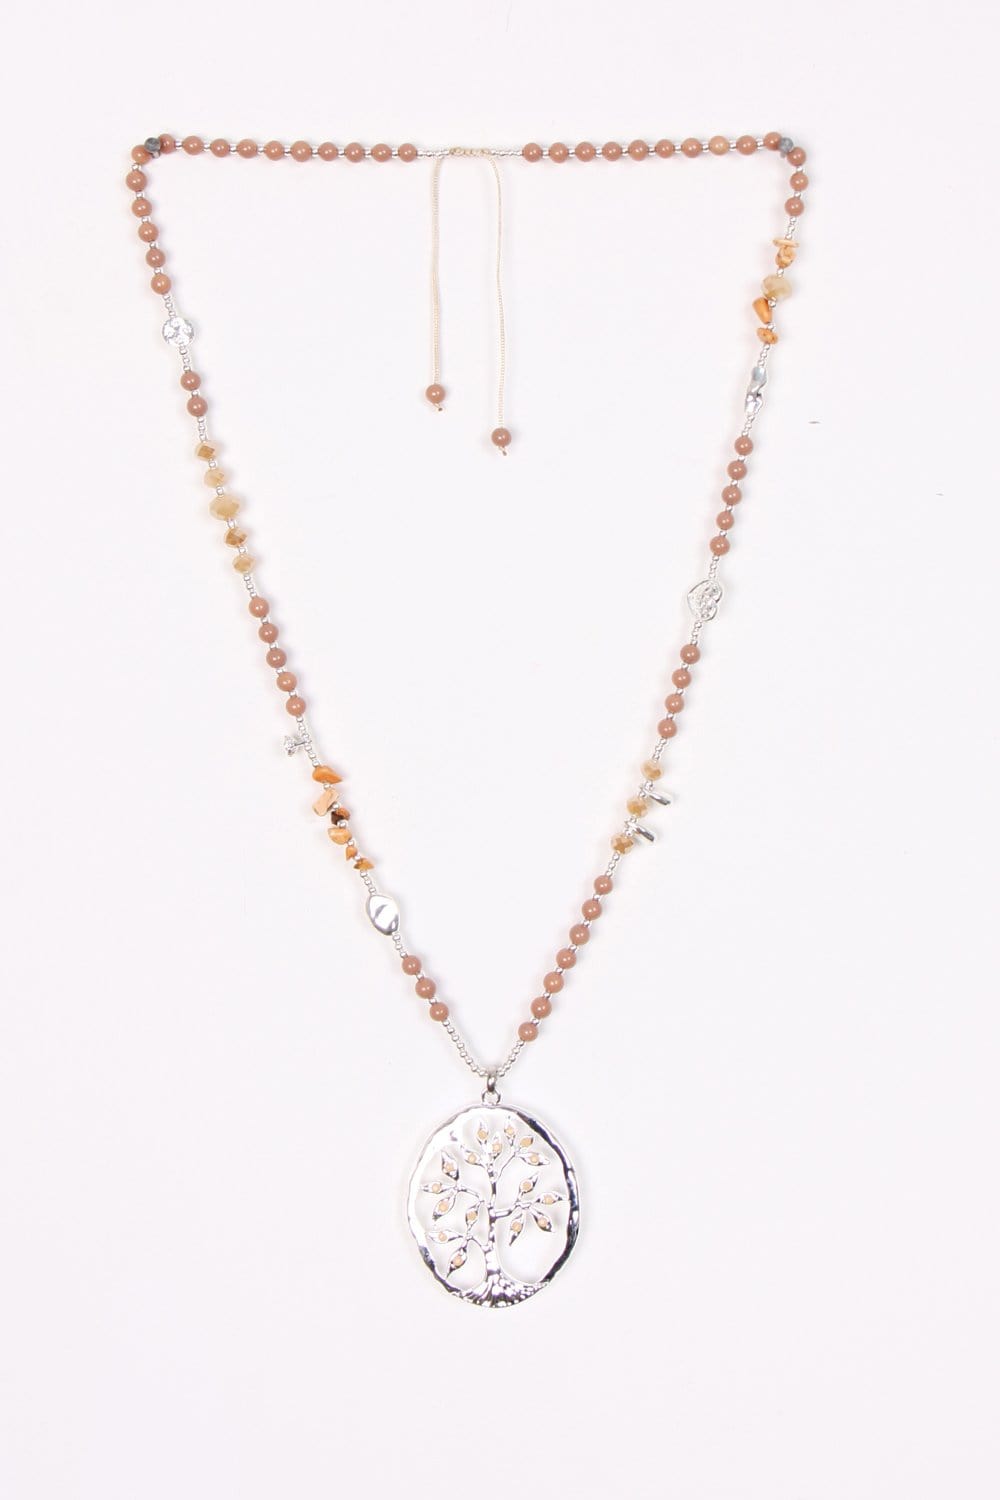 Babs Beaded Tree of Life Necklace - LB Boutique